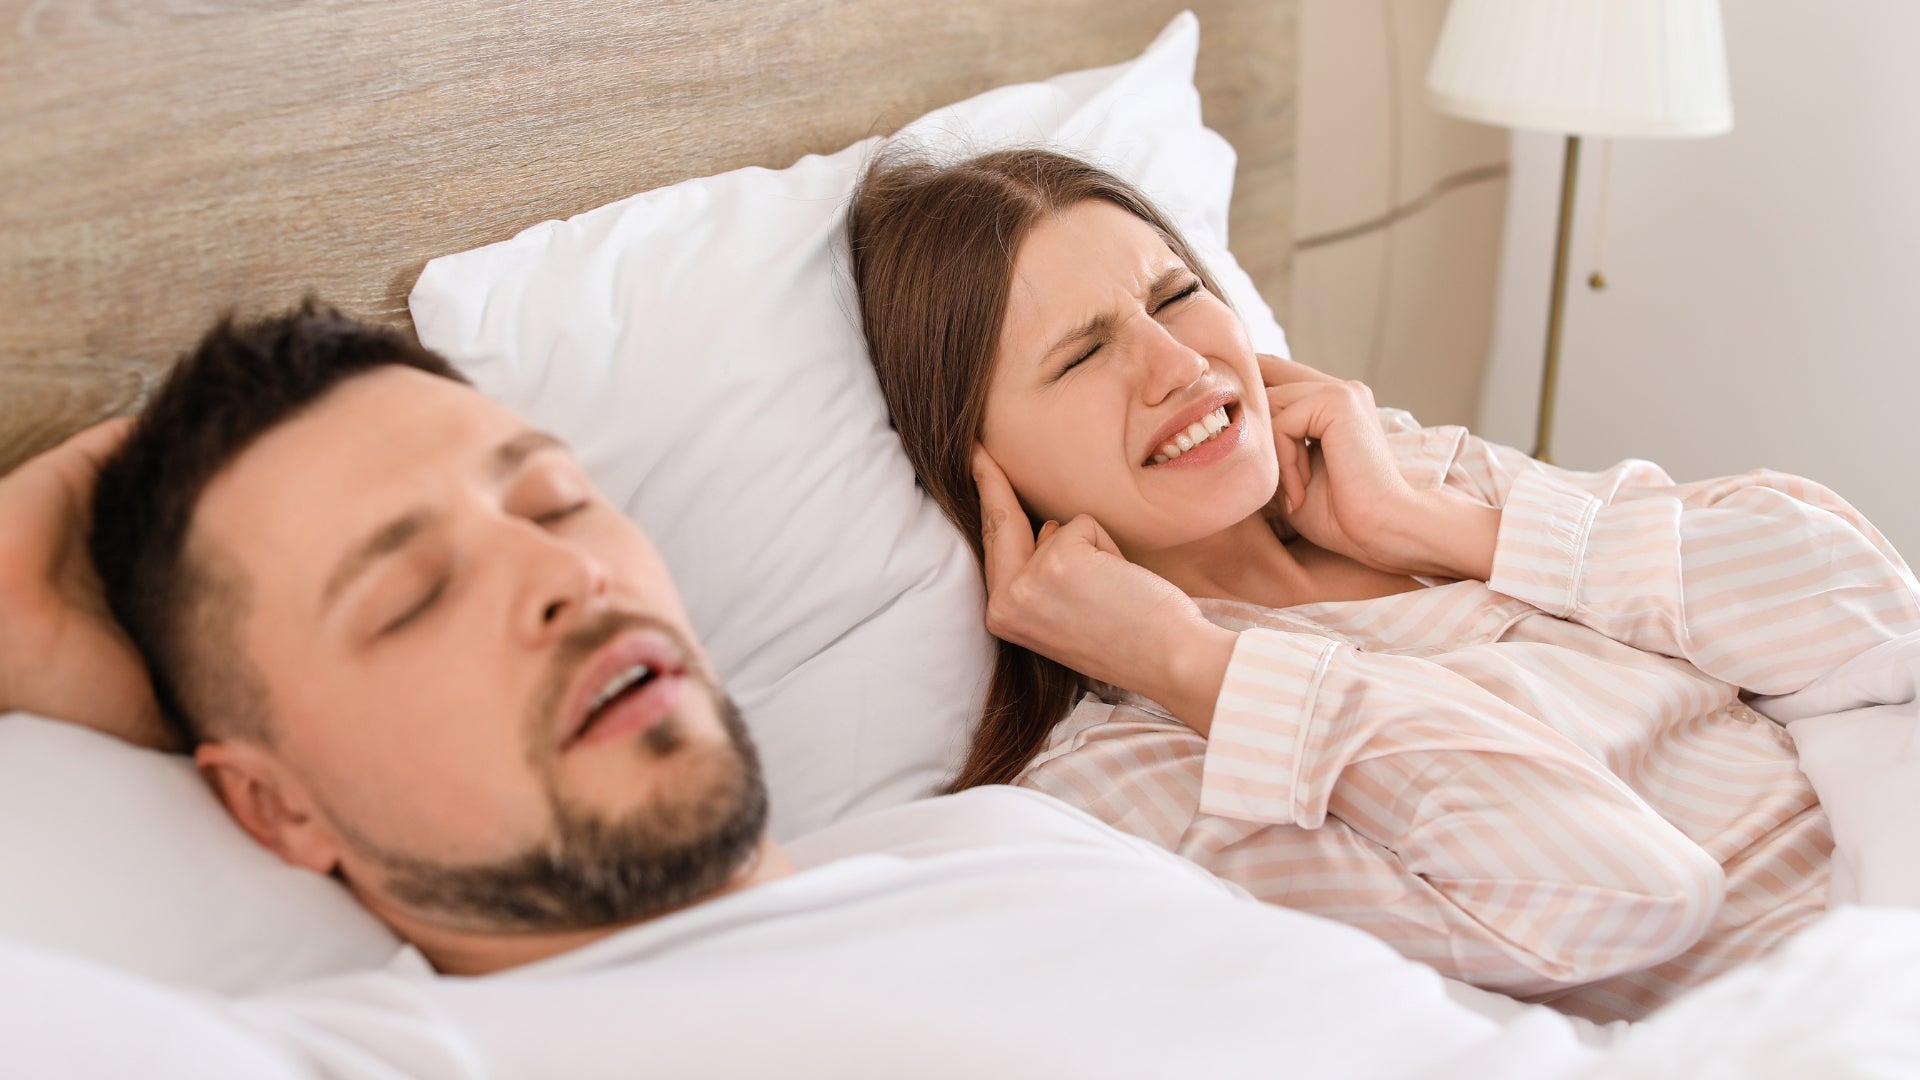 Silence the Night: Bedtime Routines to Reduce Snoring